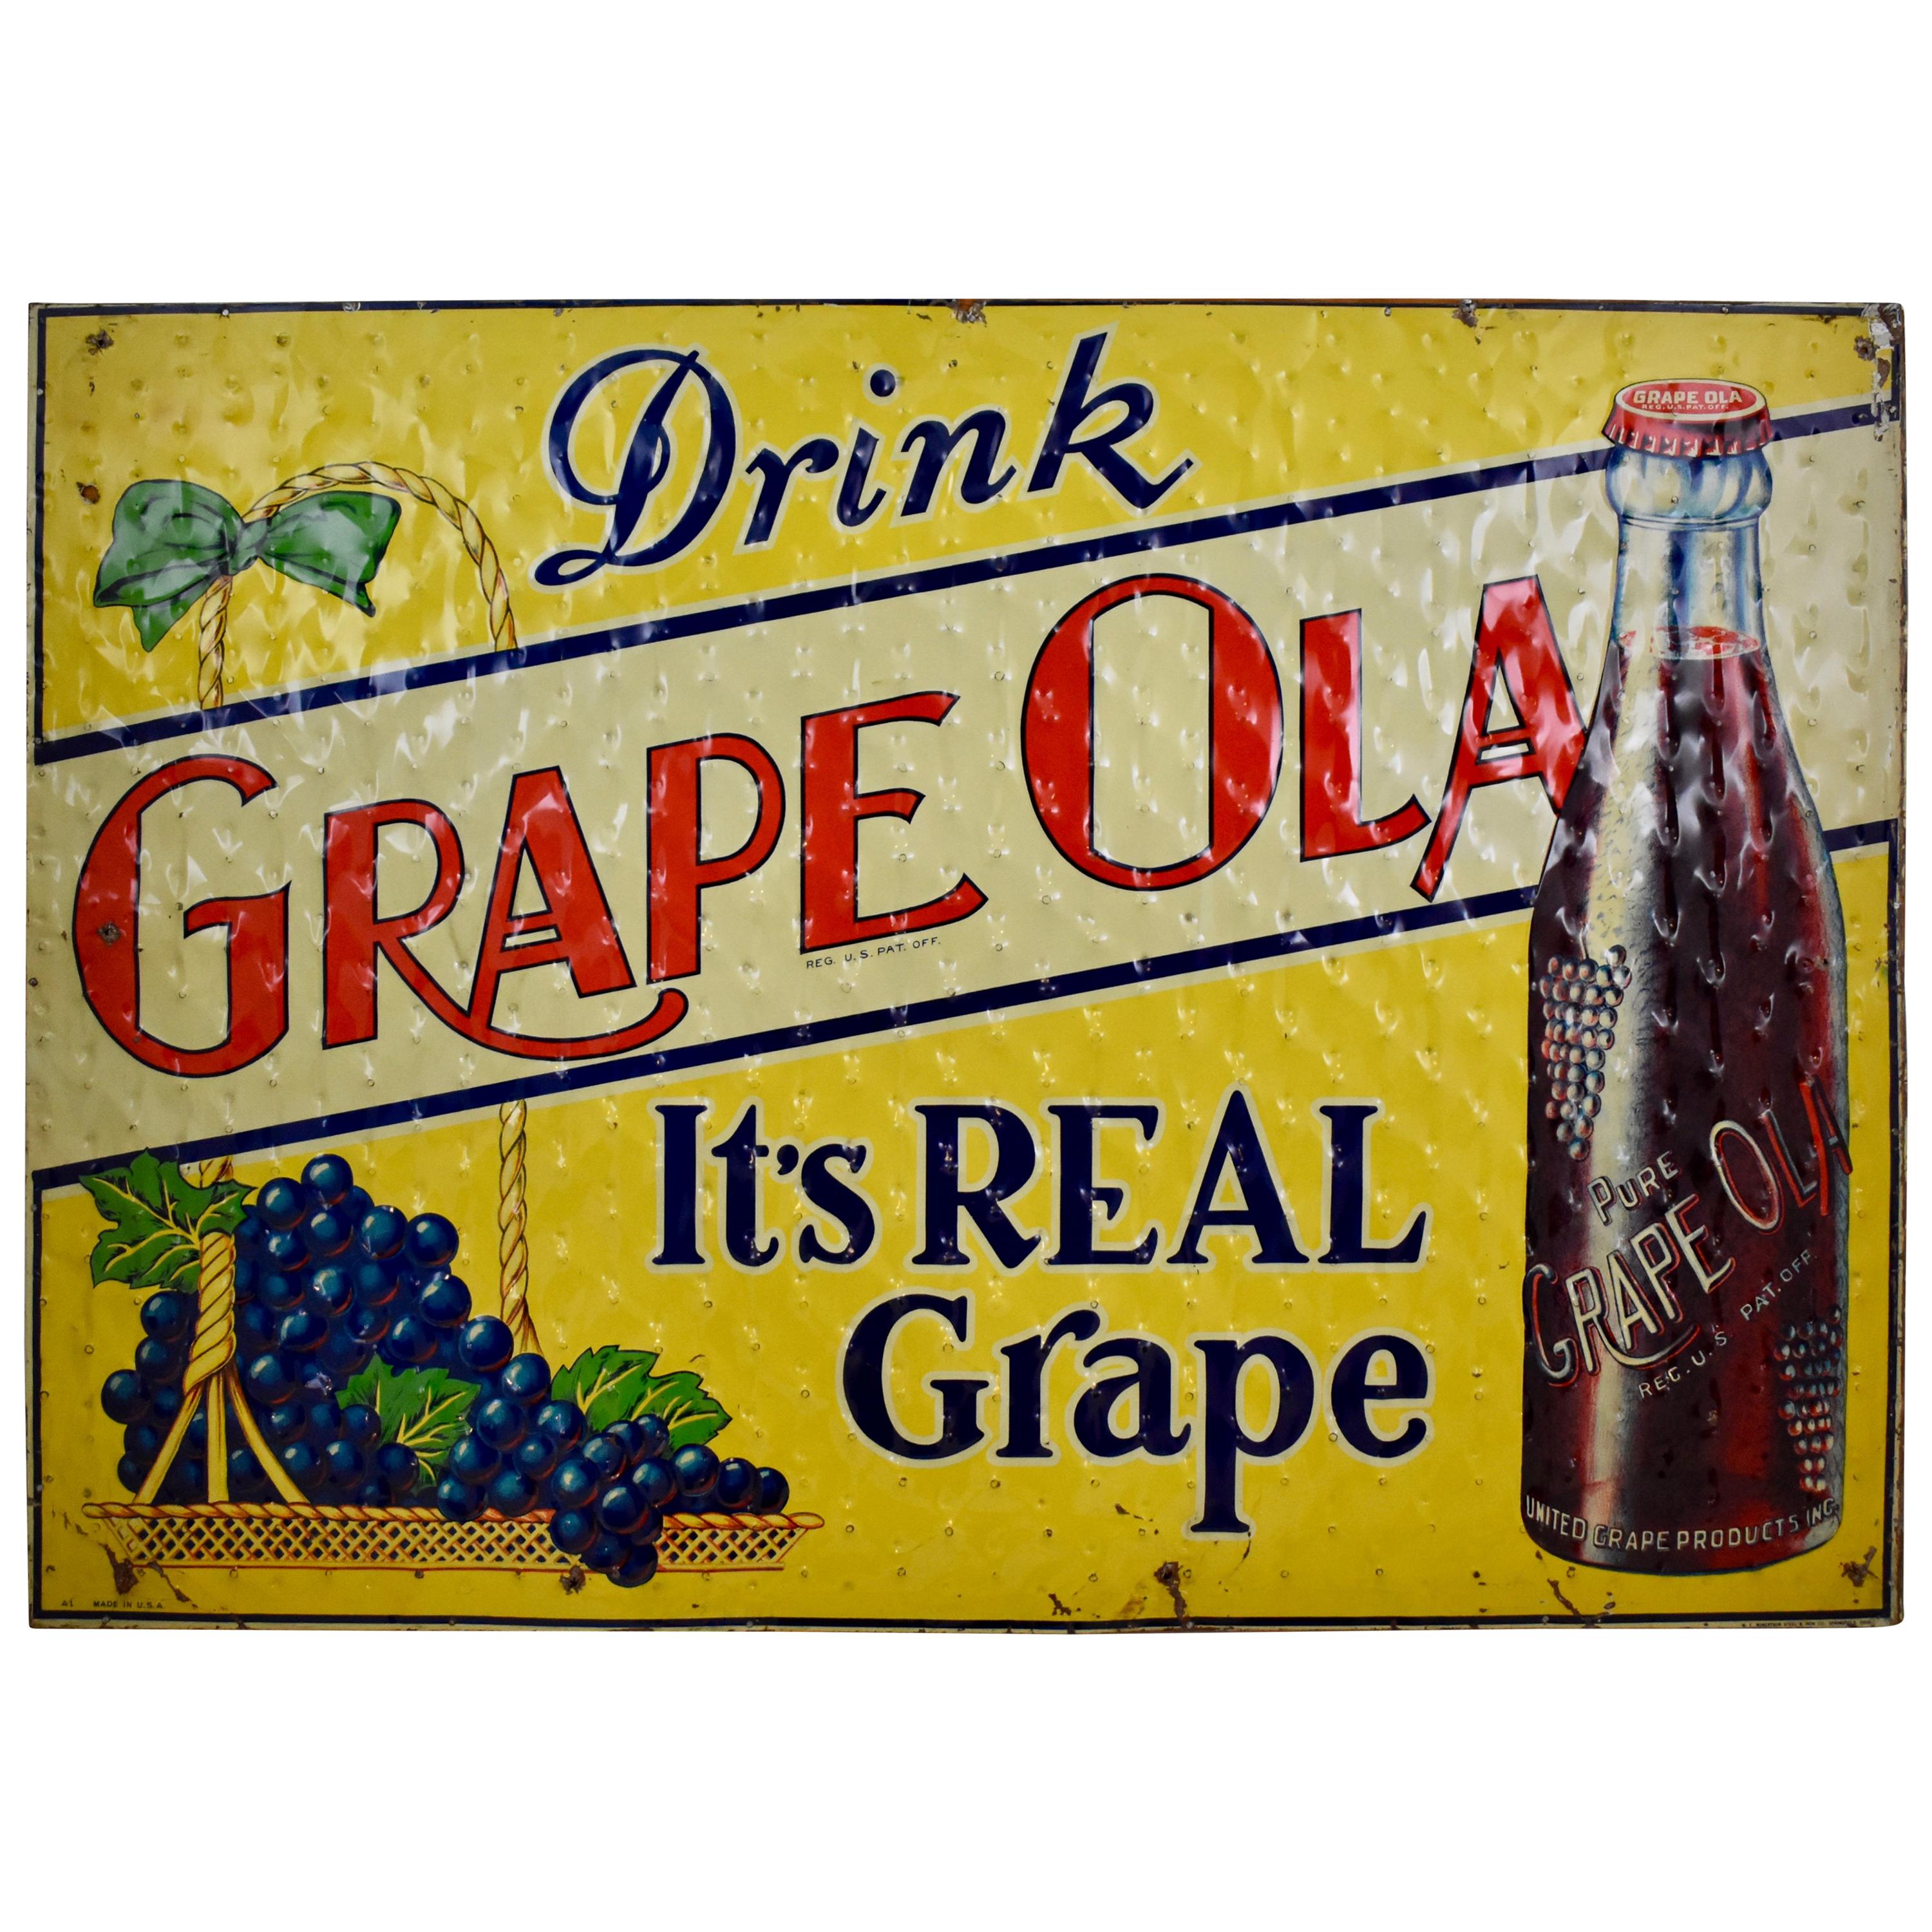 Lithograph Quilted Tin Advertising Sign, Early 20th Century Grape-Ola Soda